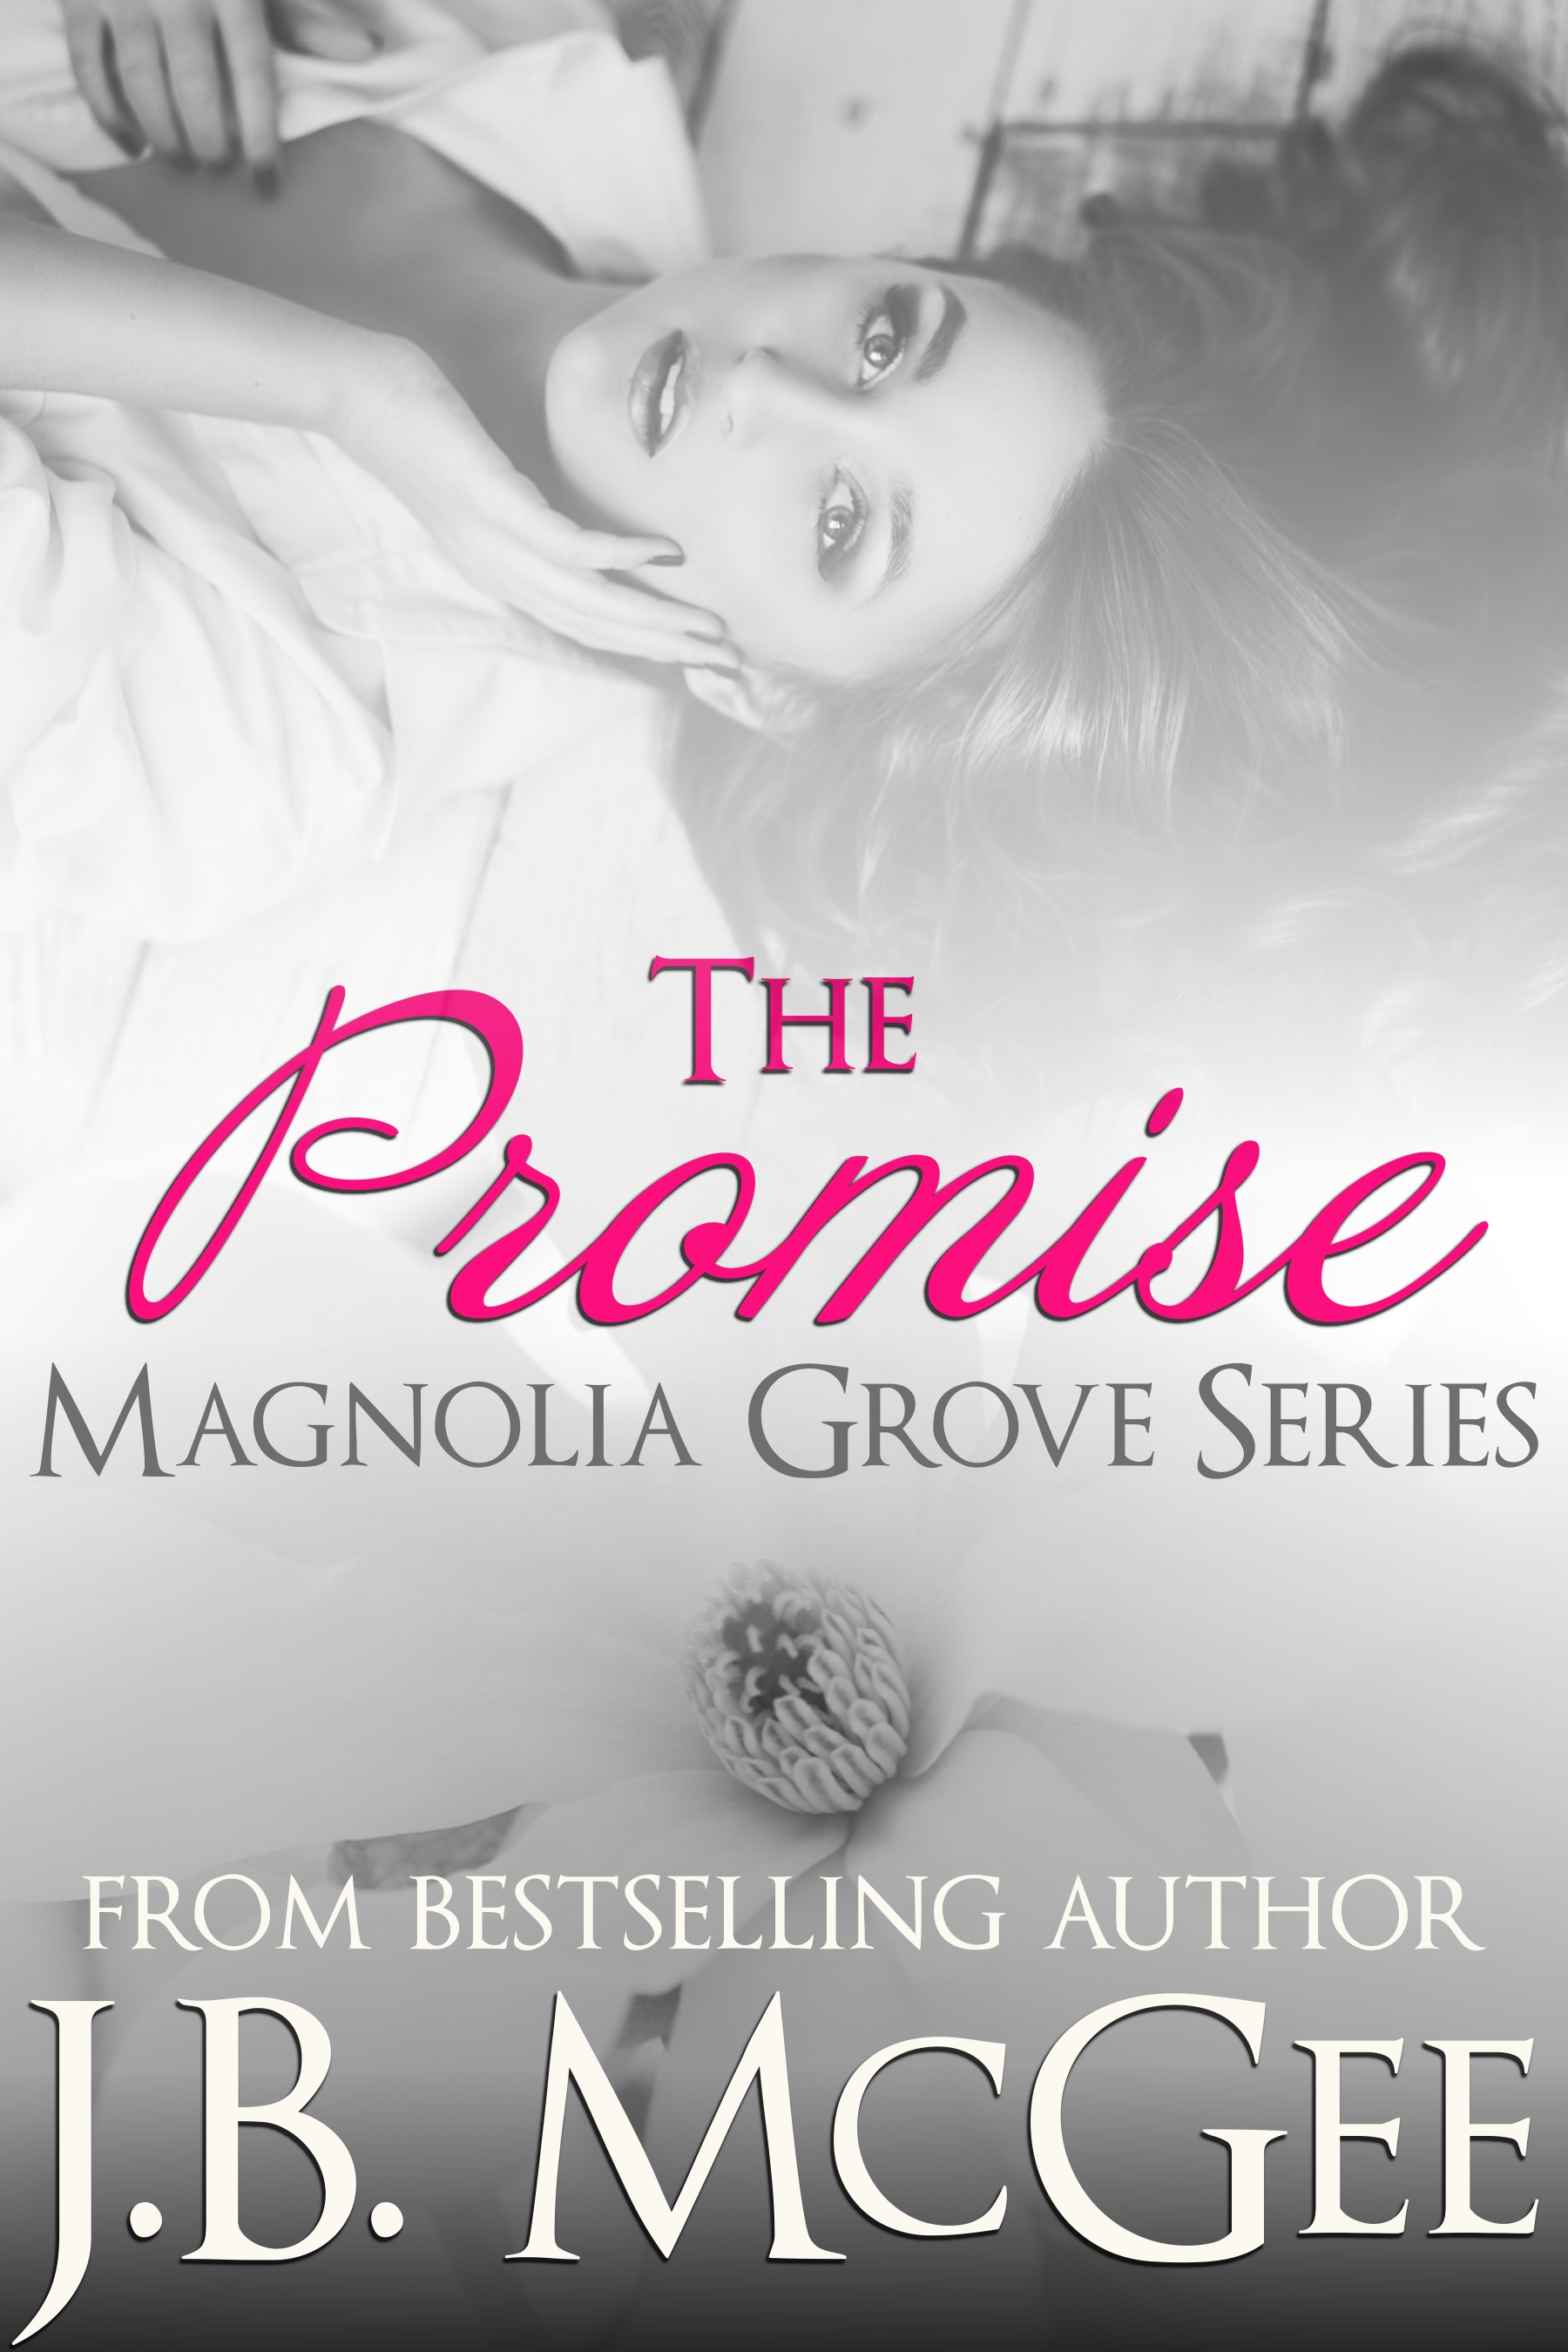 The Promise Magnolia Grove Series by J.B. McGee #releaseday @j_b_mcgee